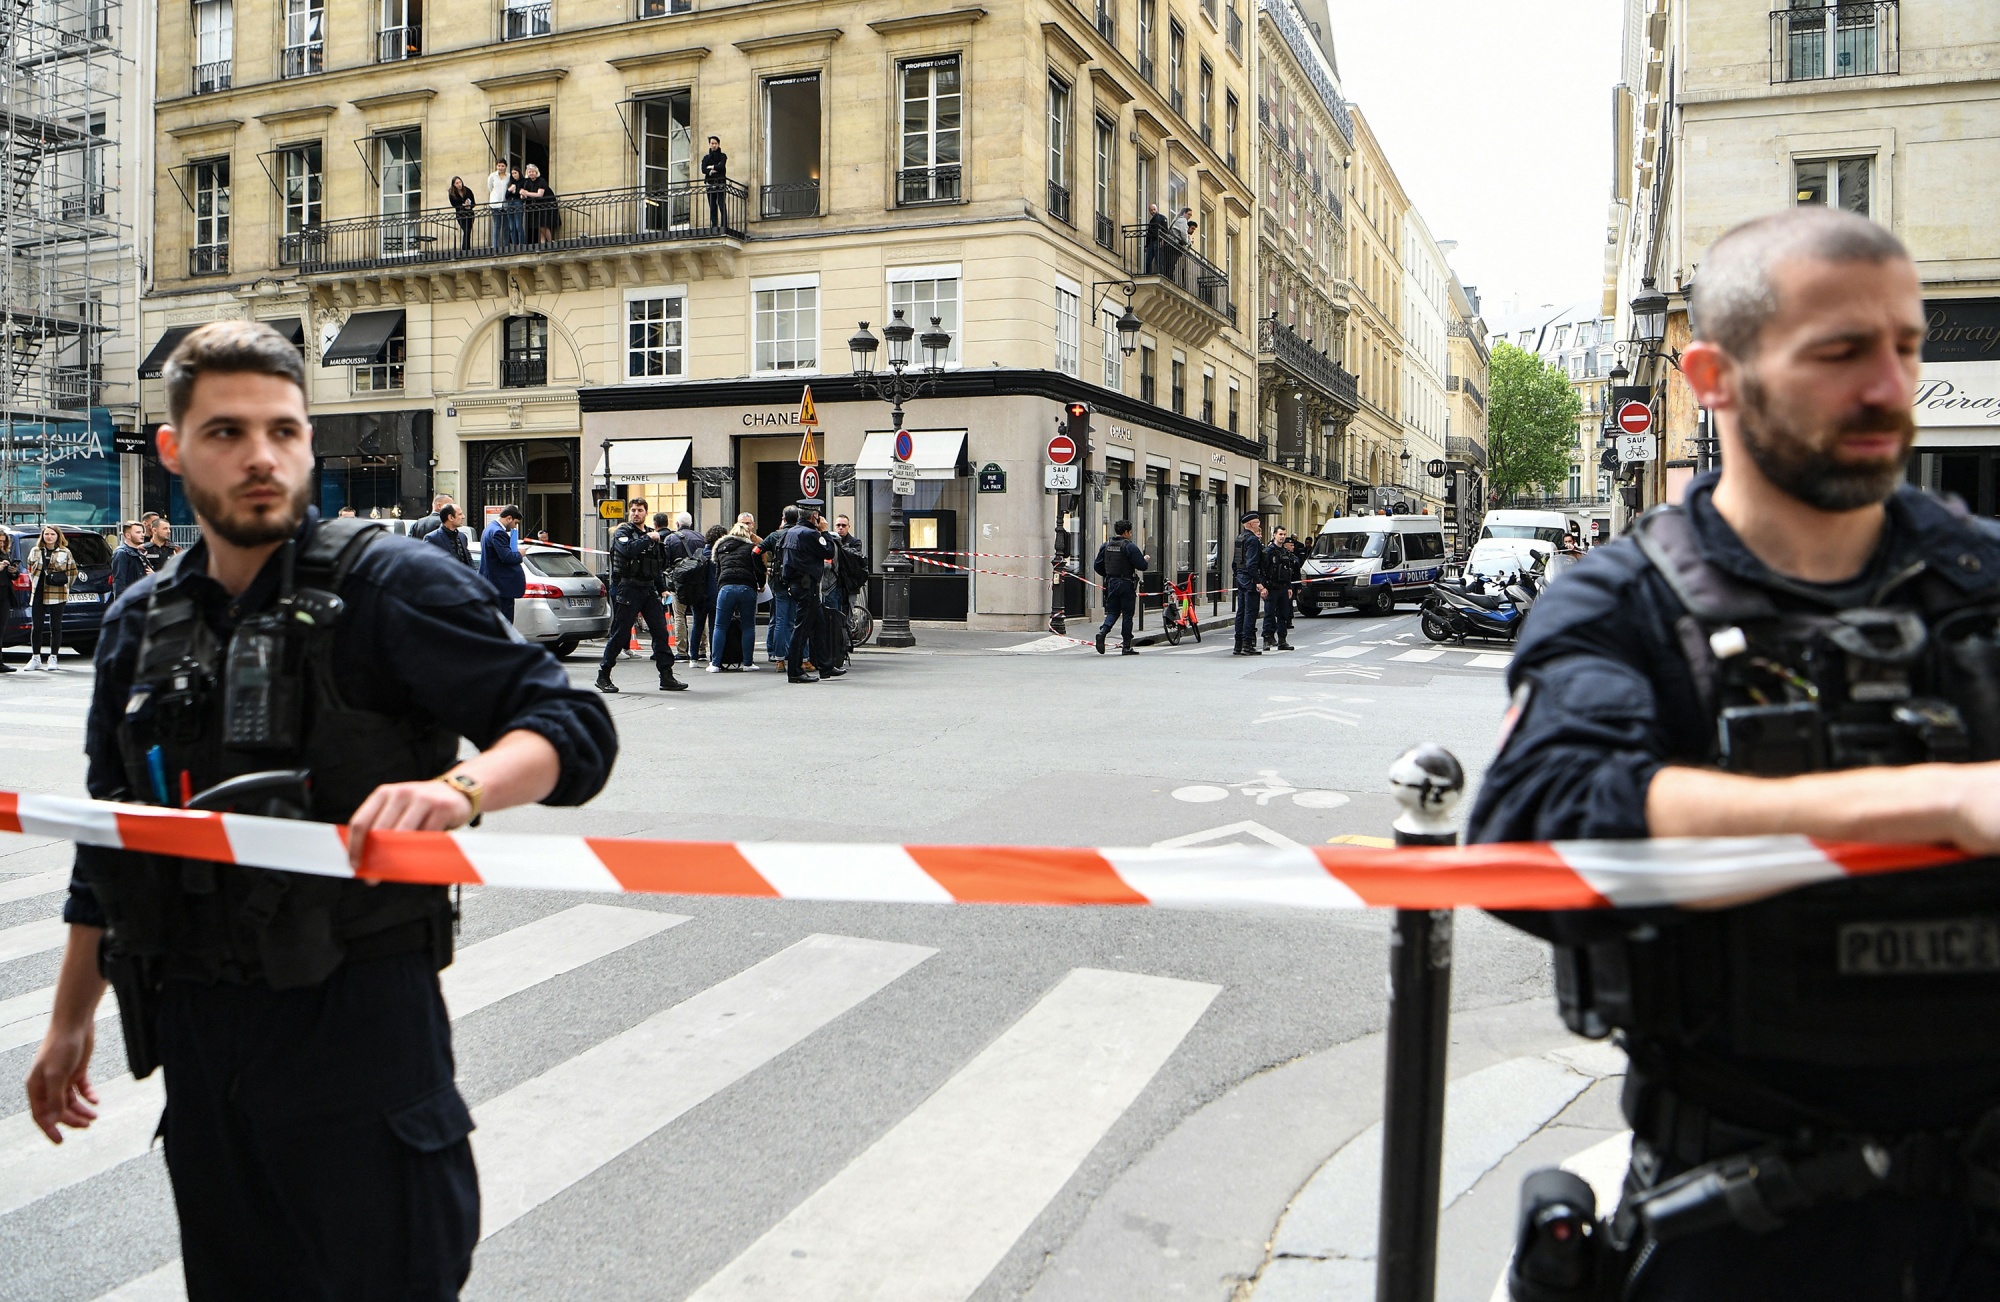 Armed gang robs Chanel store in Paris